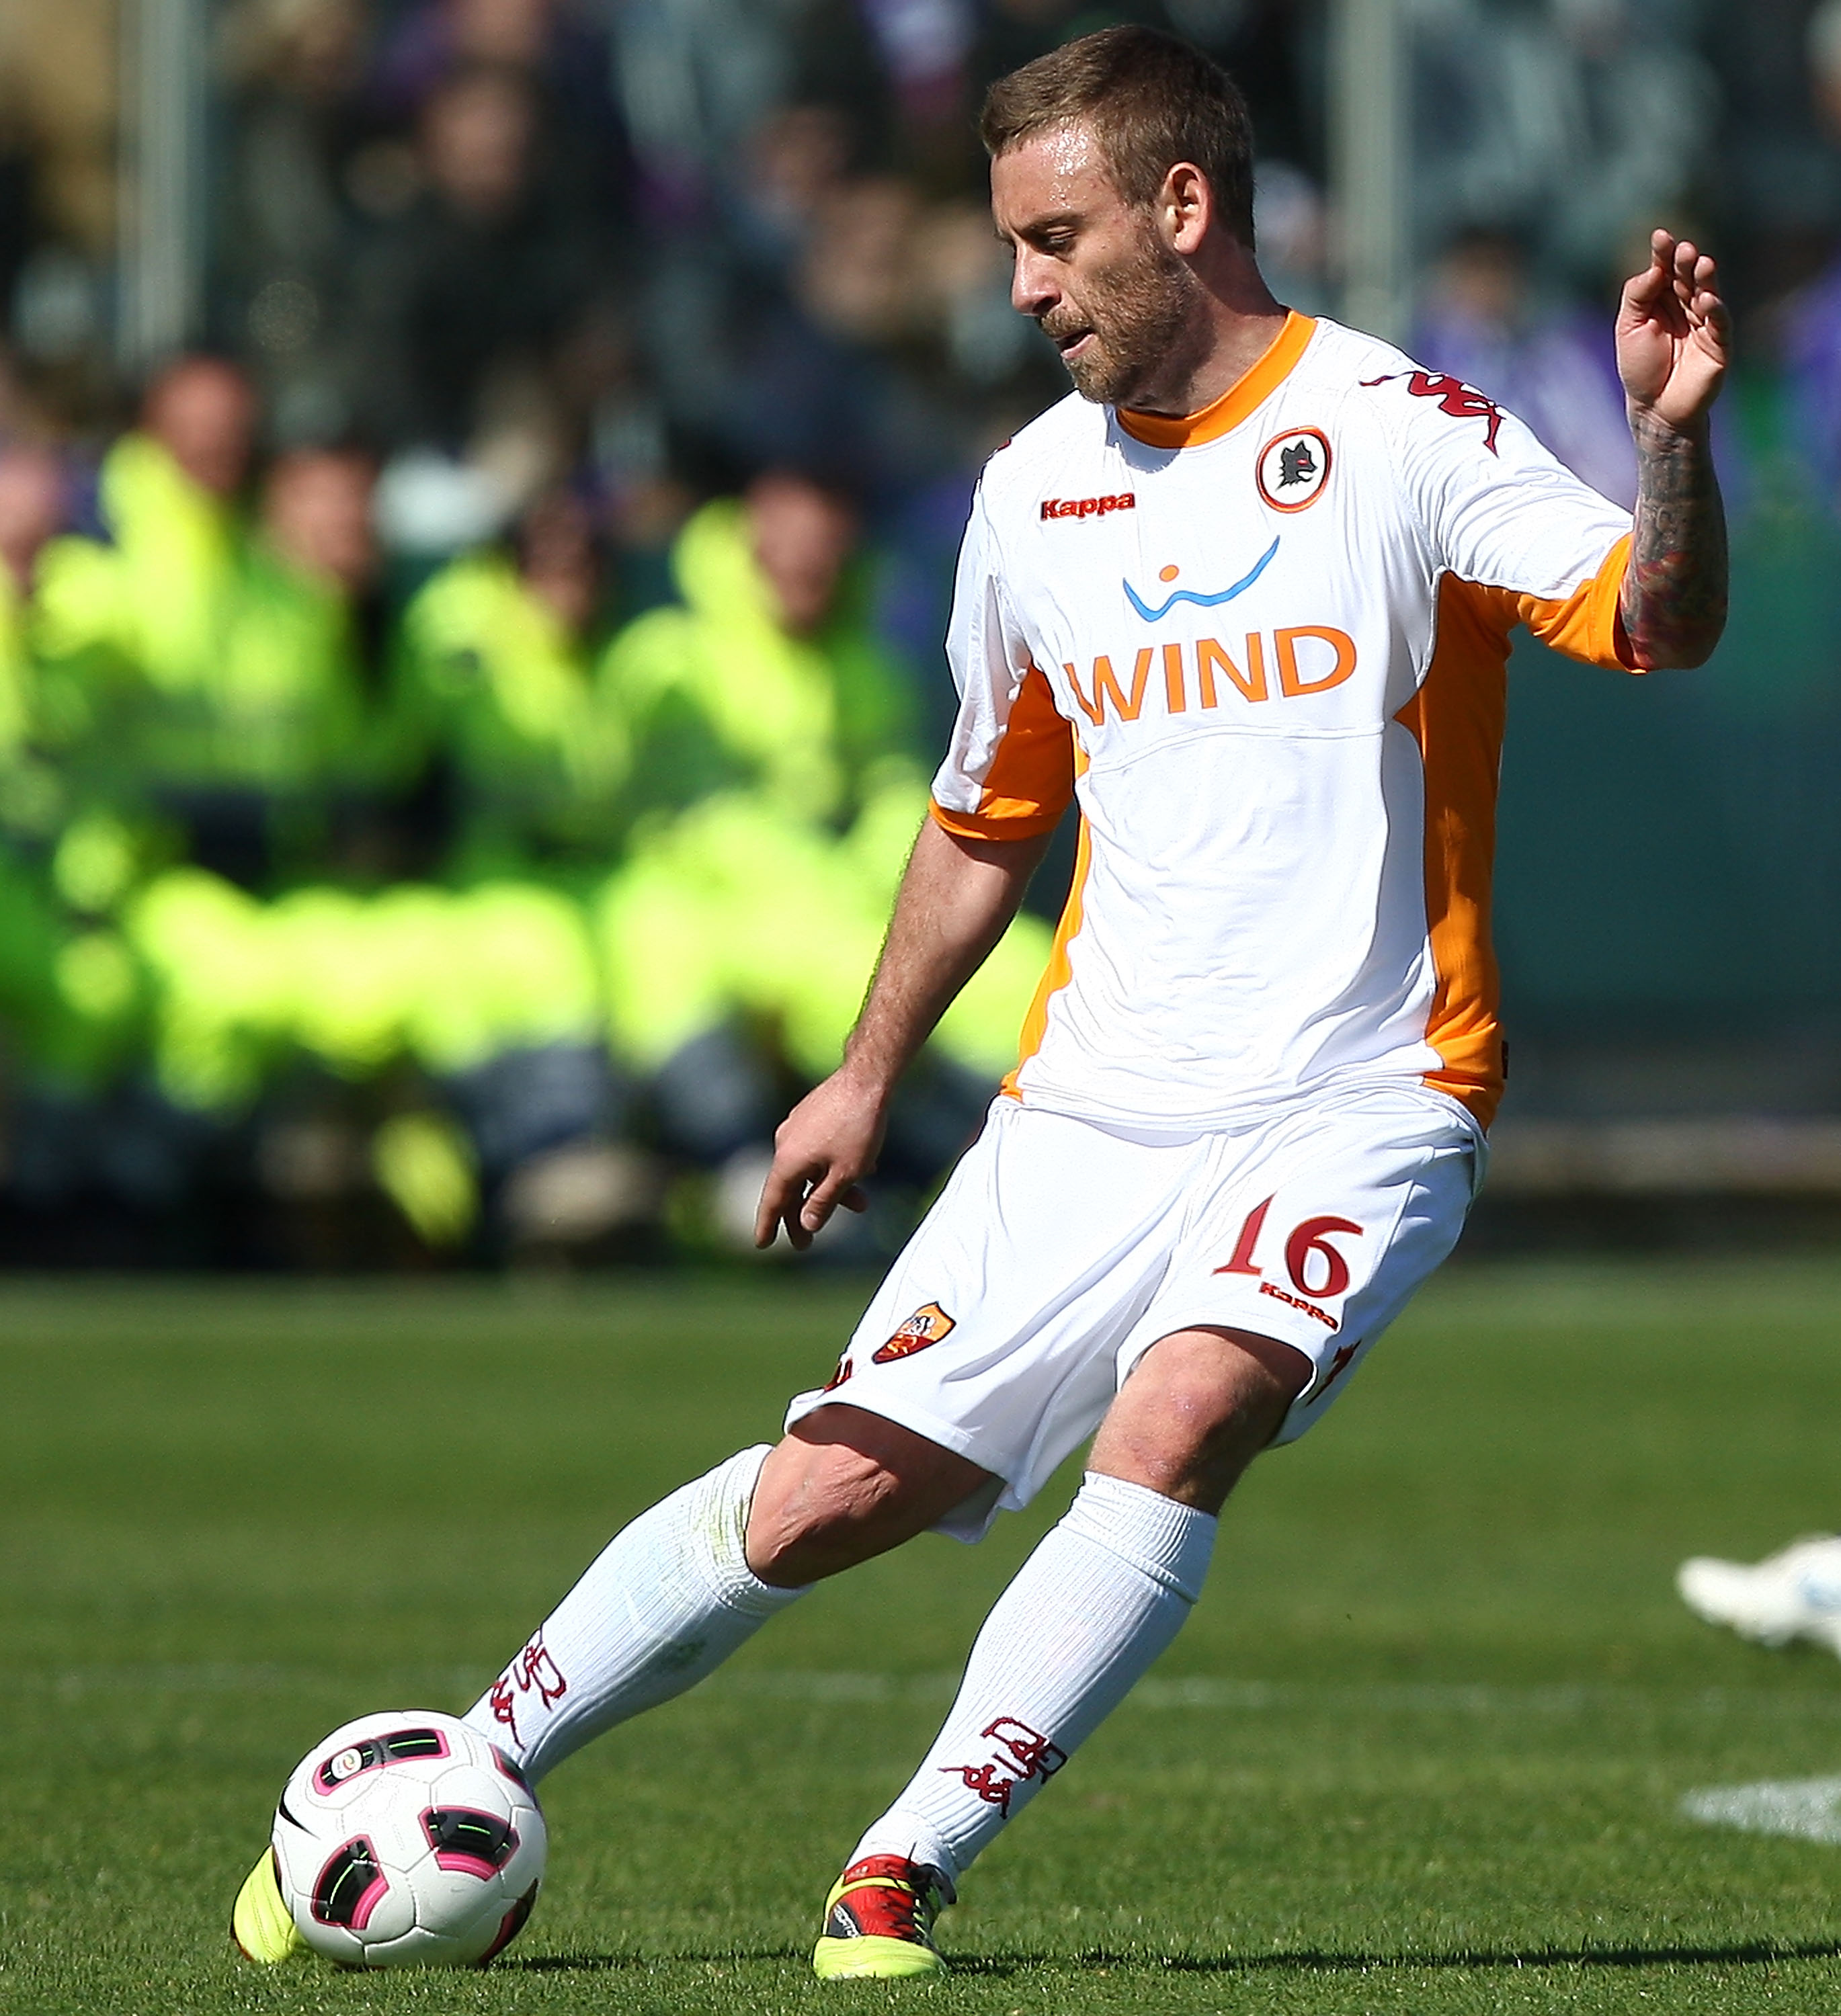 FLORENCE, ITALY - MARCH 20:  Daniele De Rossi of AS Roma in action during the Serie A match between ACF Fiorentina and AS Roma at Stadio Artemio Franchi on March 20, 2011 in Florence, Italy.  (Photo by Paolo Bruno/Getty Images)